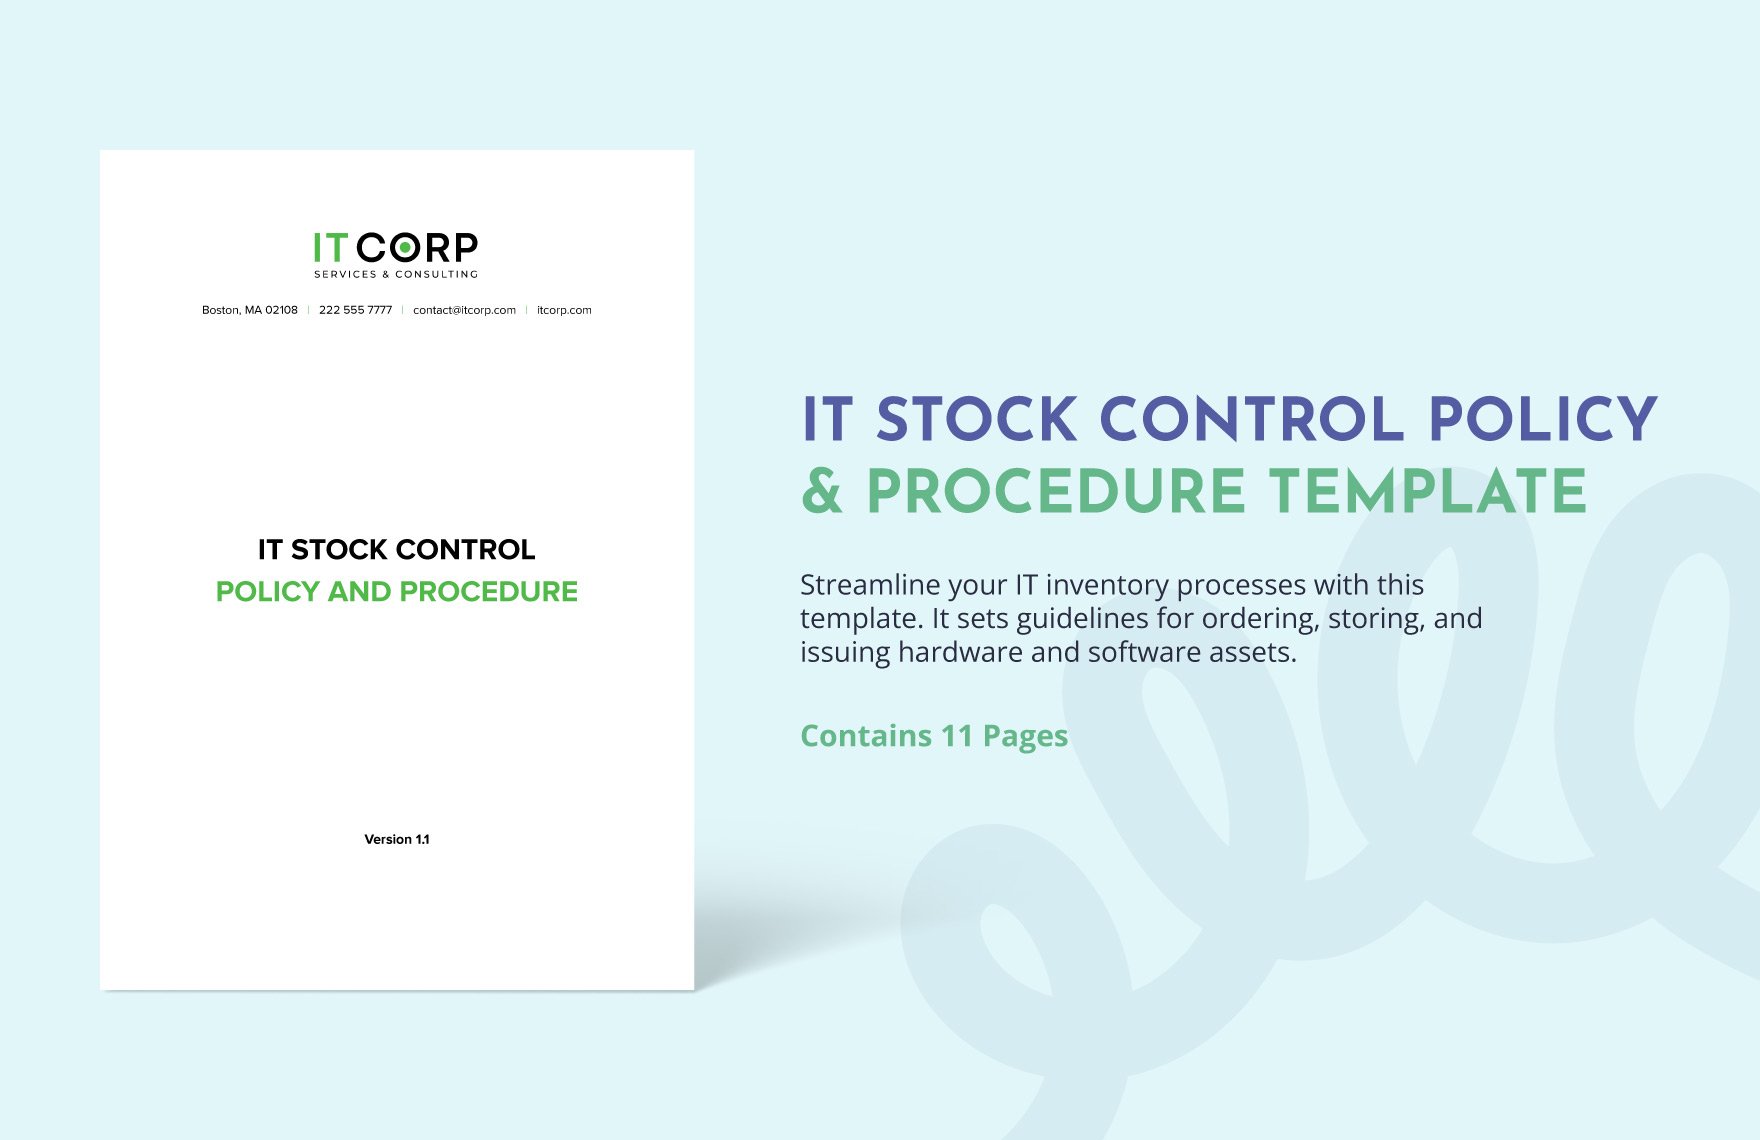 IT Stock Control Policy & Procedure Template